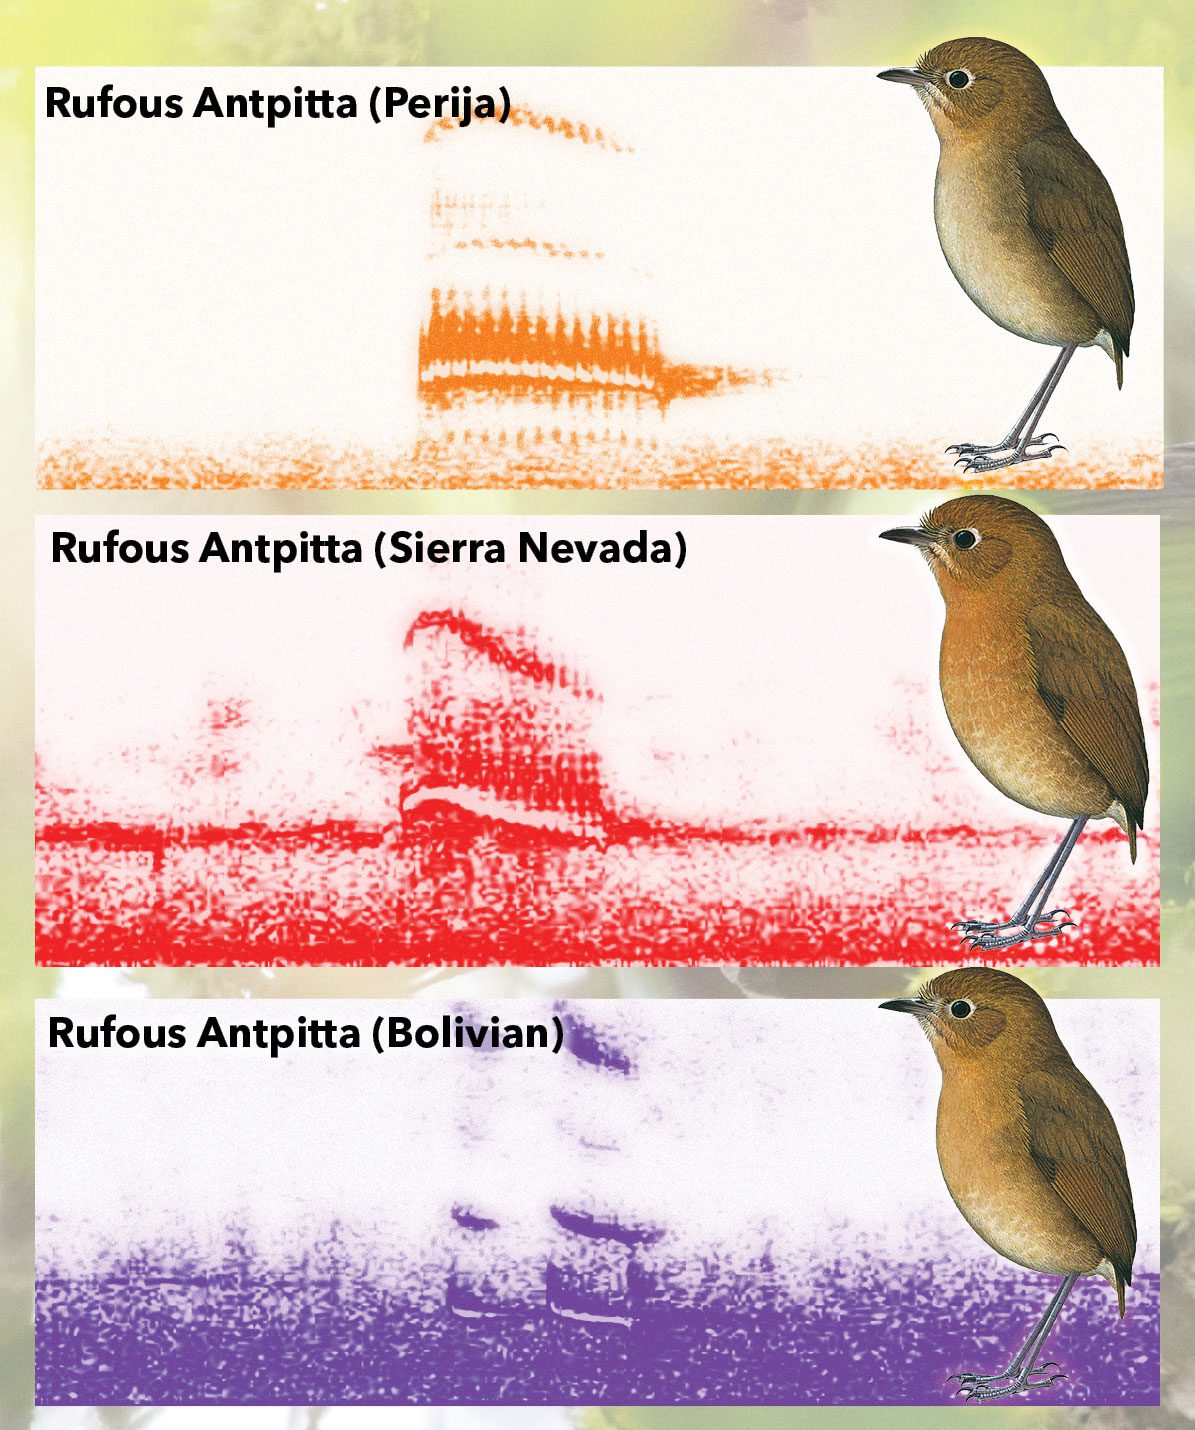 The 16 varieties of Rufous Antpittas are virtually indistinguishable by sight, but each population has a distinct song. Spectrograms from Macaulay Library (from top): Kathi Borgmann, Paul Coopmans, Rose Ann Rowlett. Illustrations by Norman Arlott/Lynx Edicions.